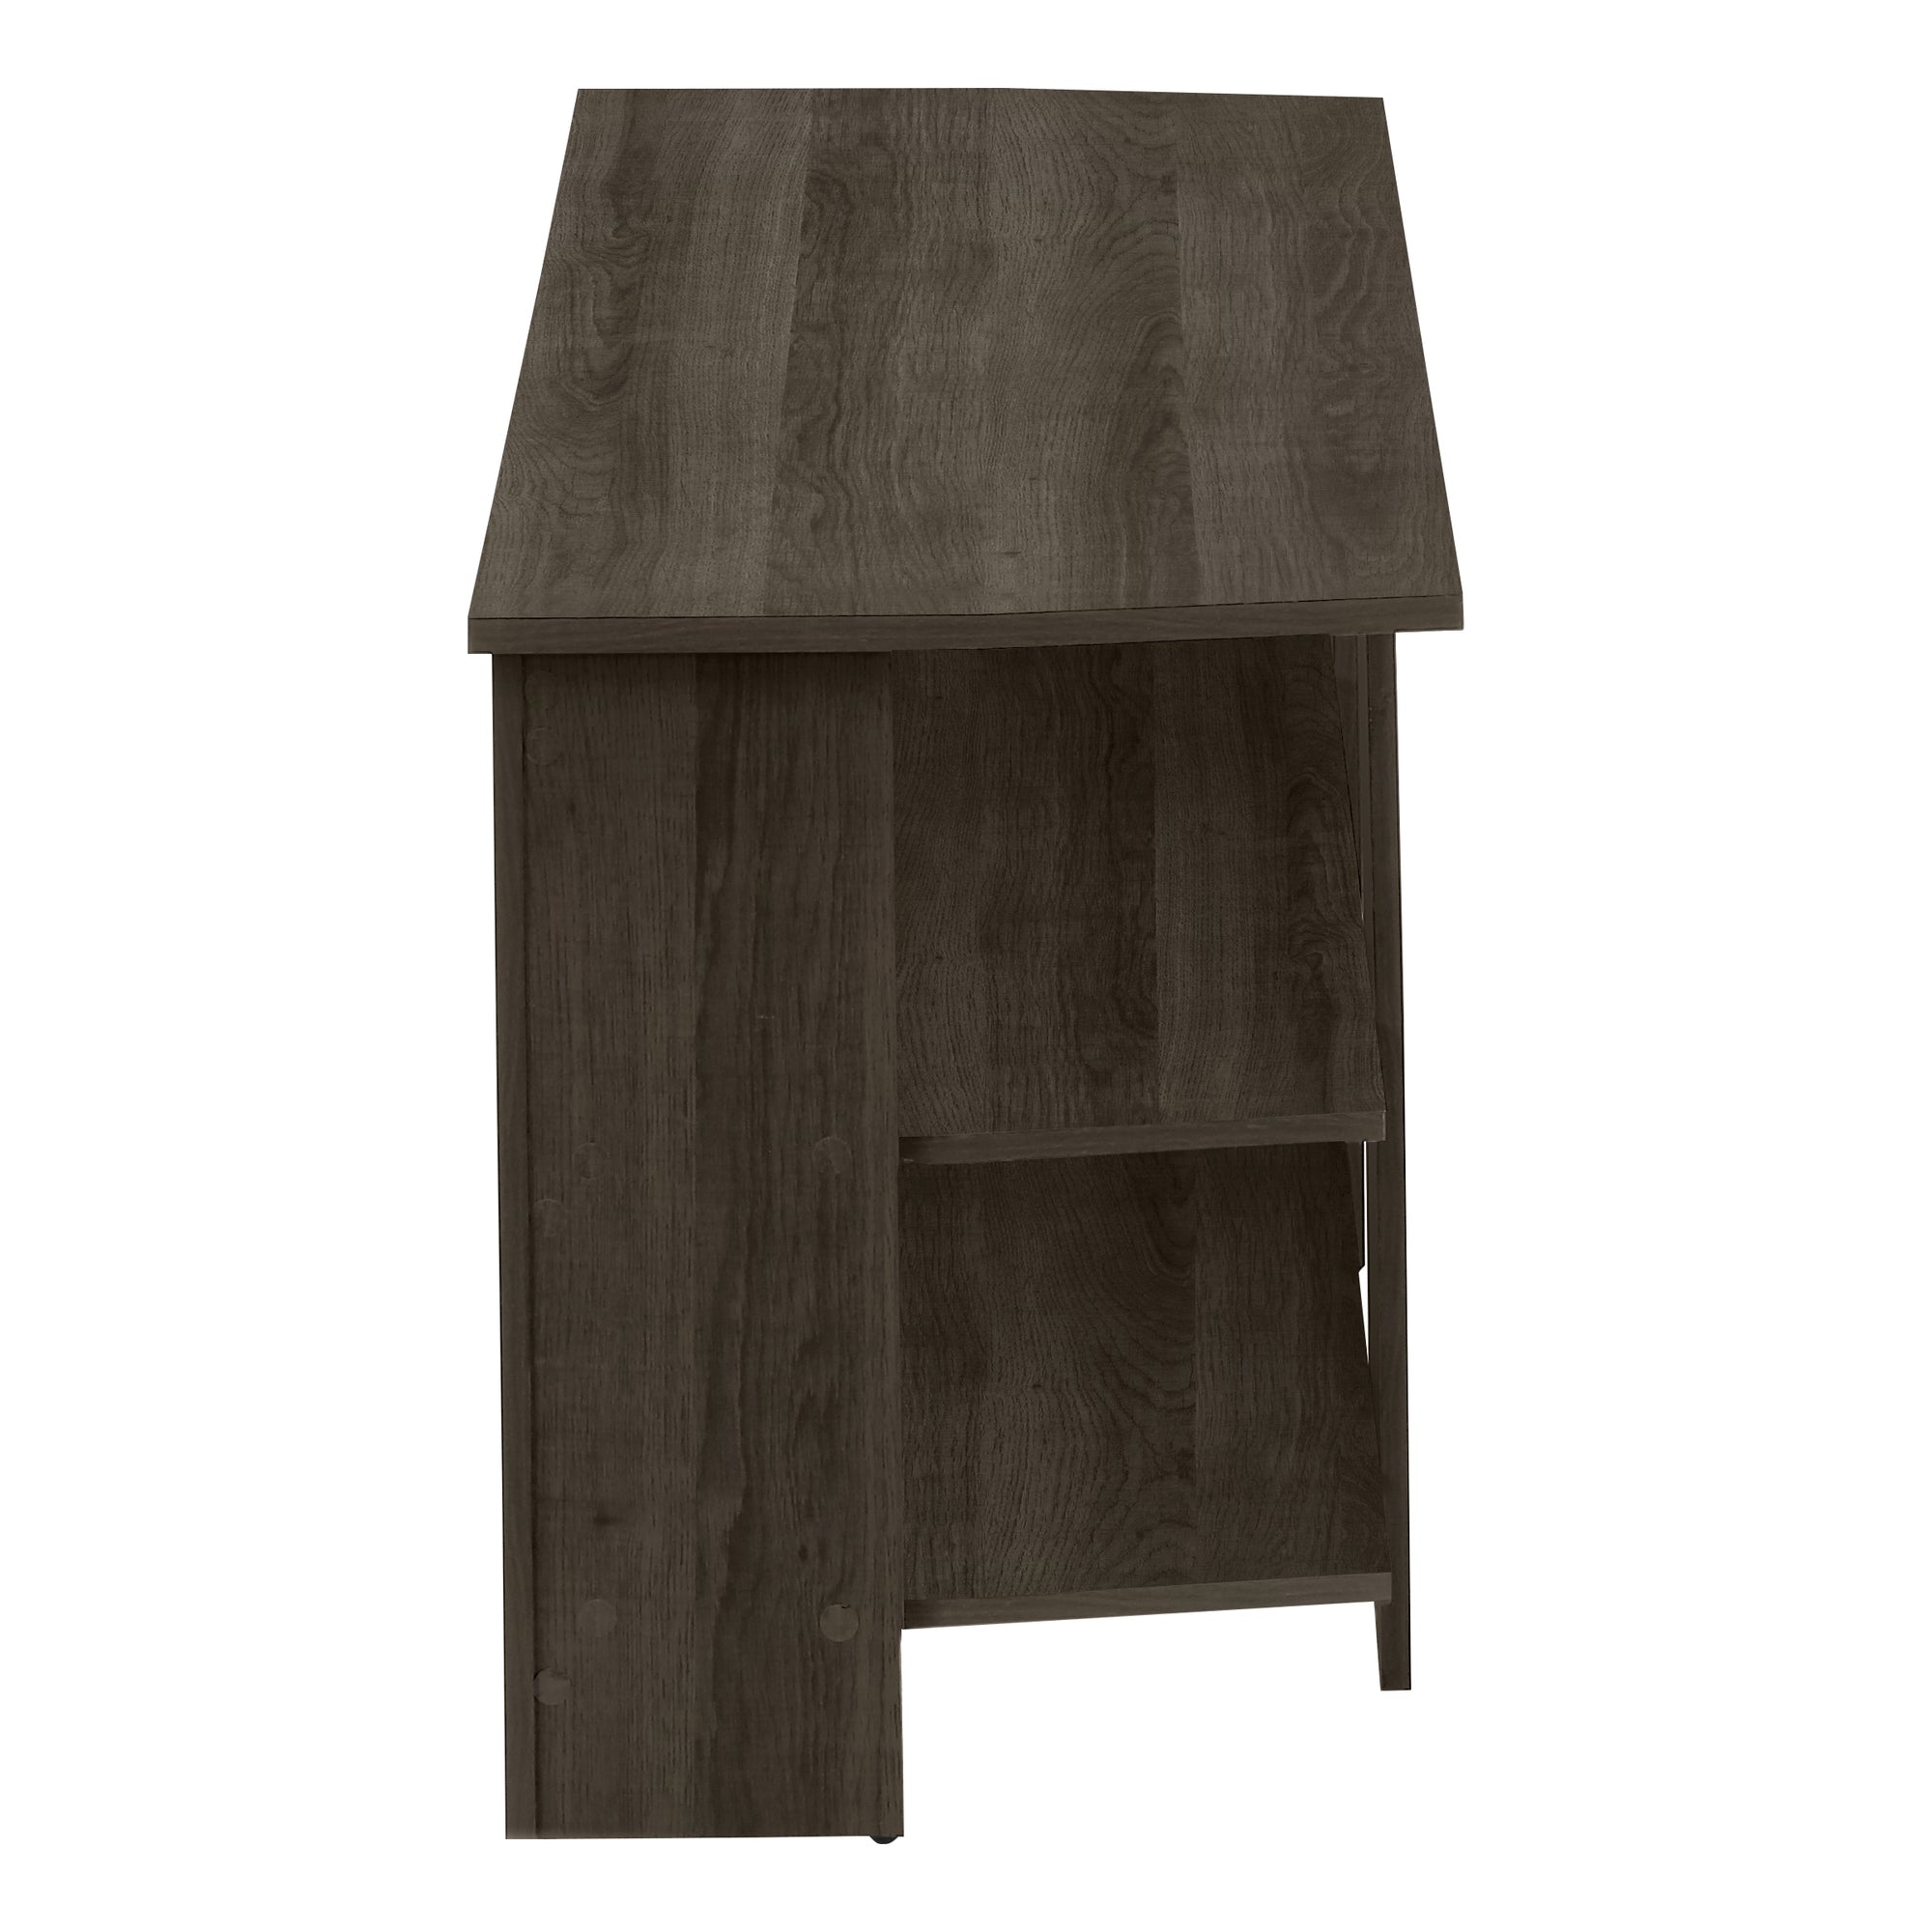 MN-522514    Tv Stand, 42 Inch, Console, Media Entertainment Center, Storage Cabinet, Living Room, Bedroom, Laminate, Brown Oak, Contemporary, Modern